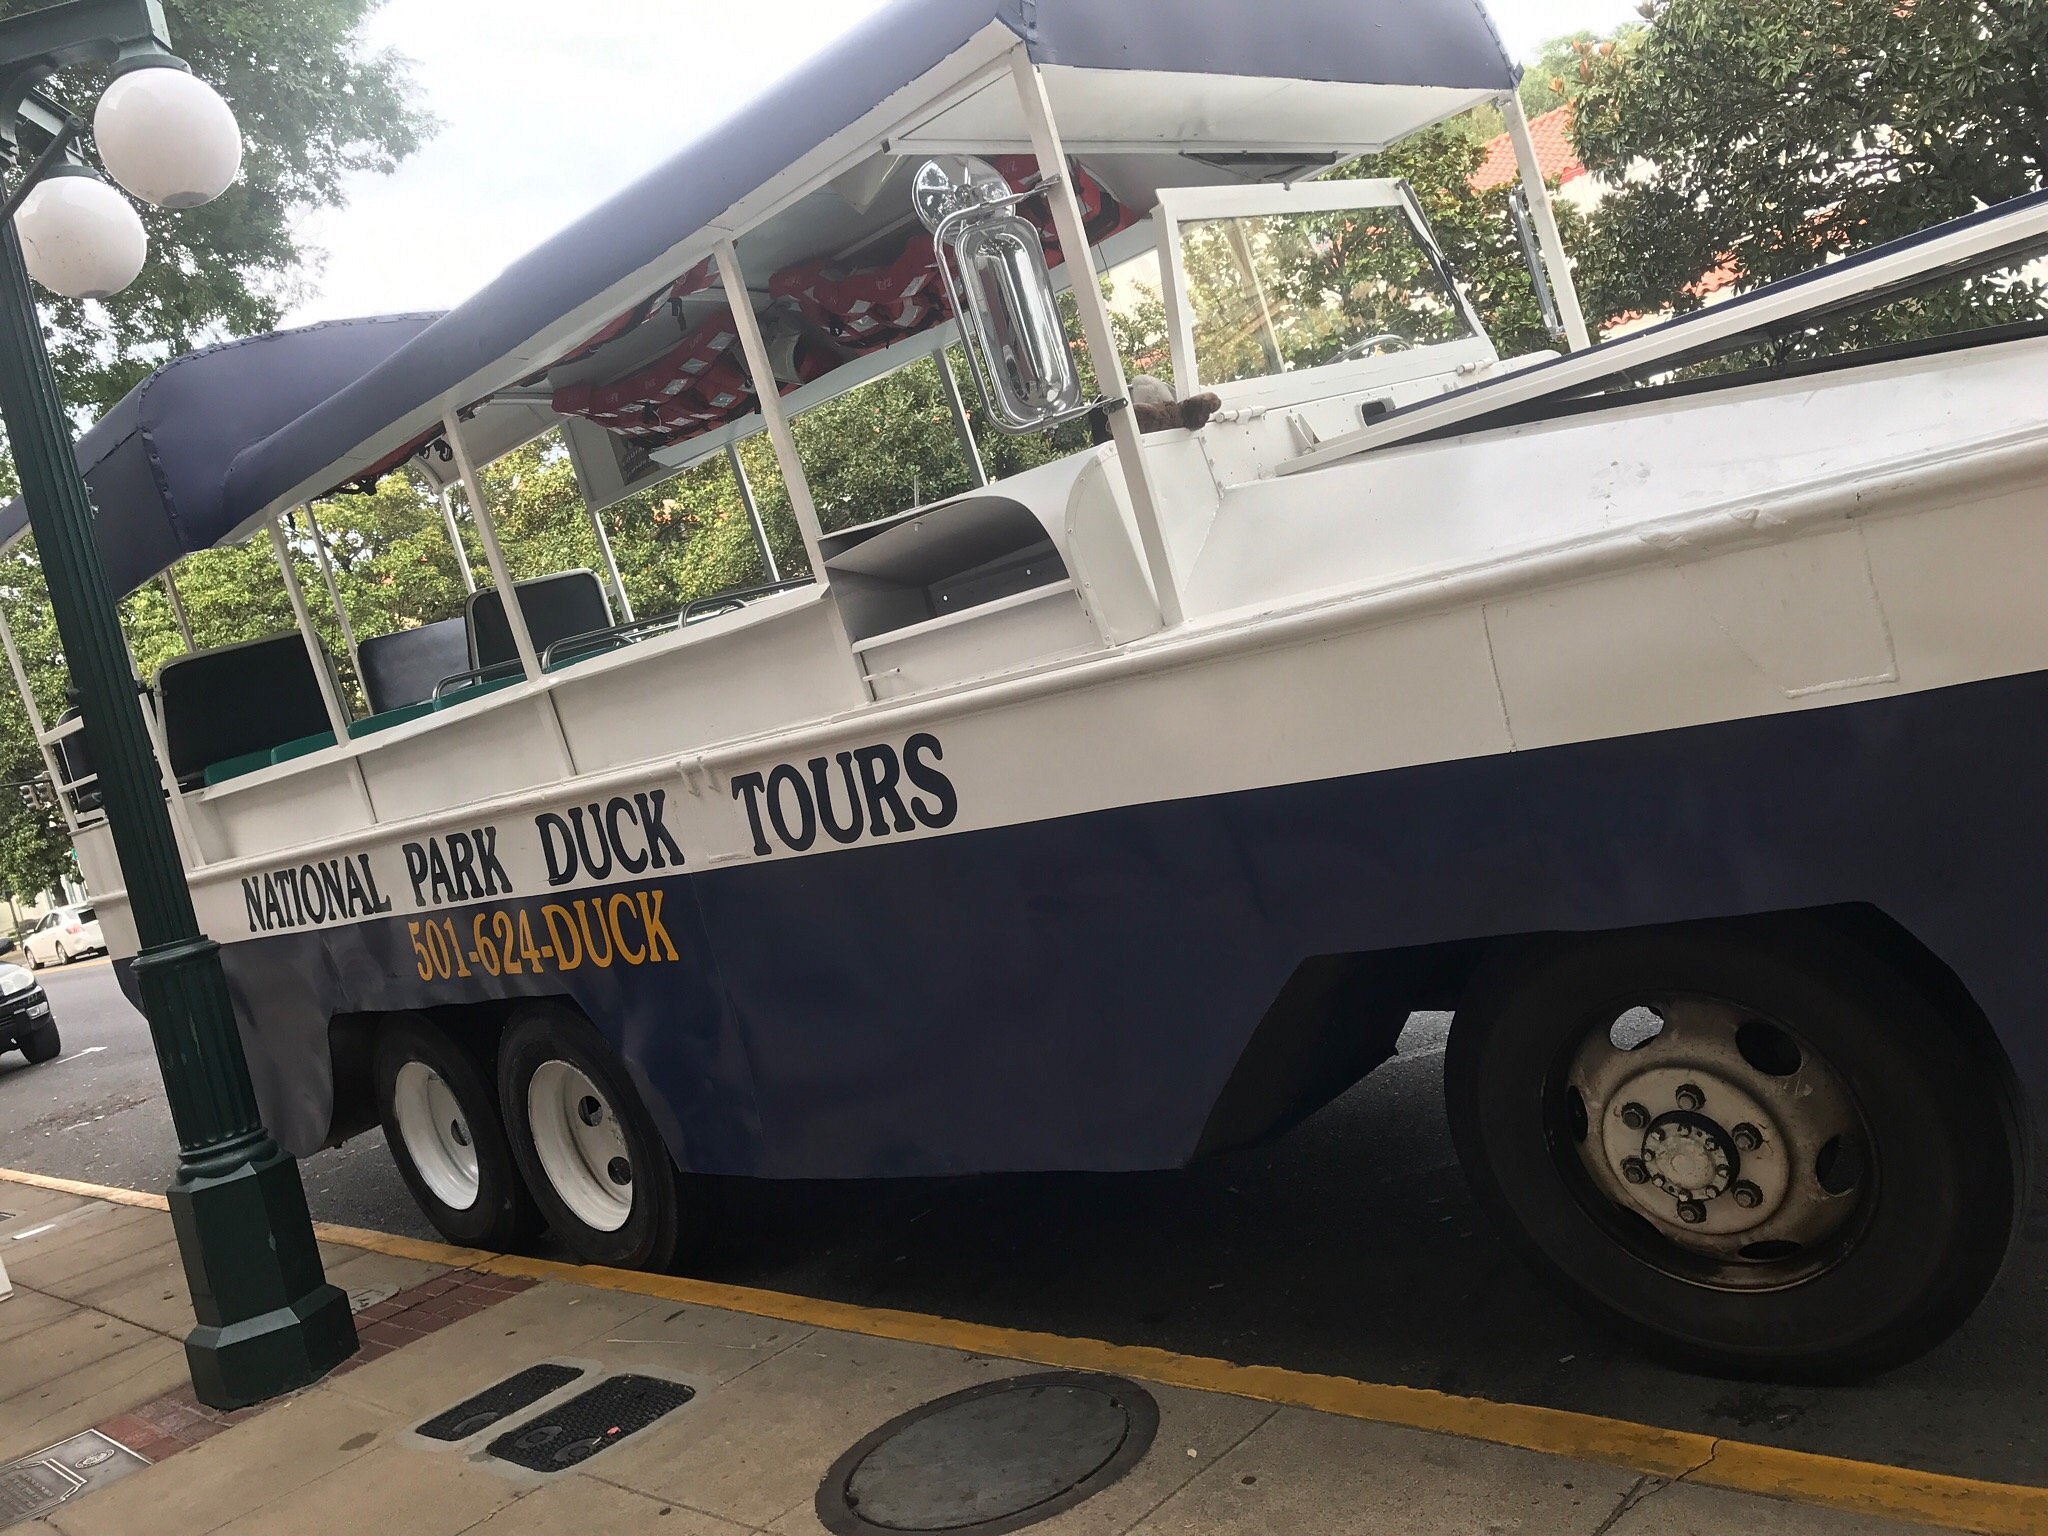 duck tour hot springs hours